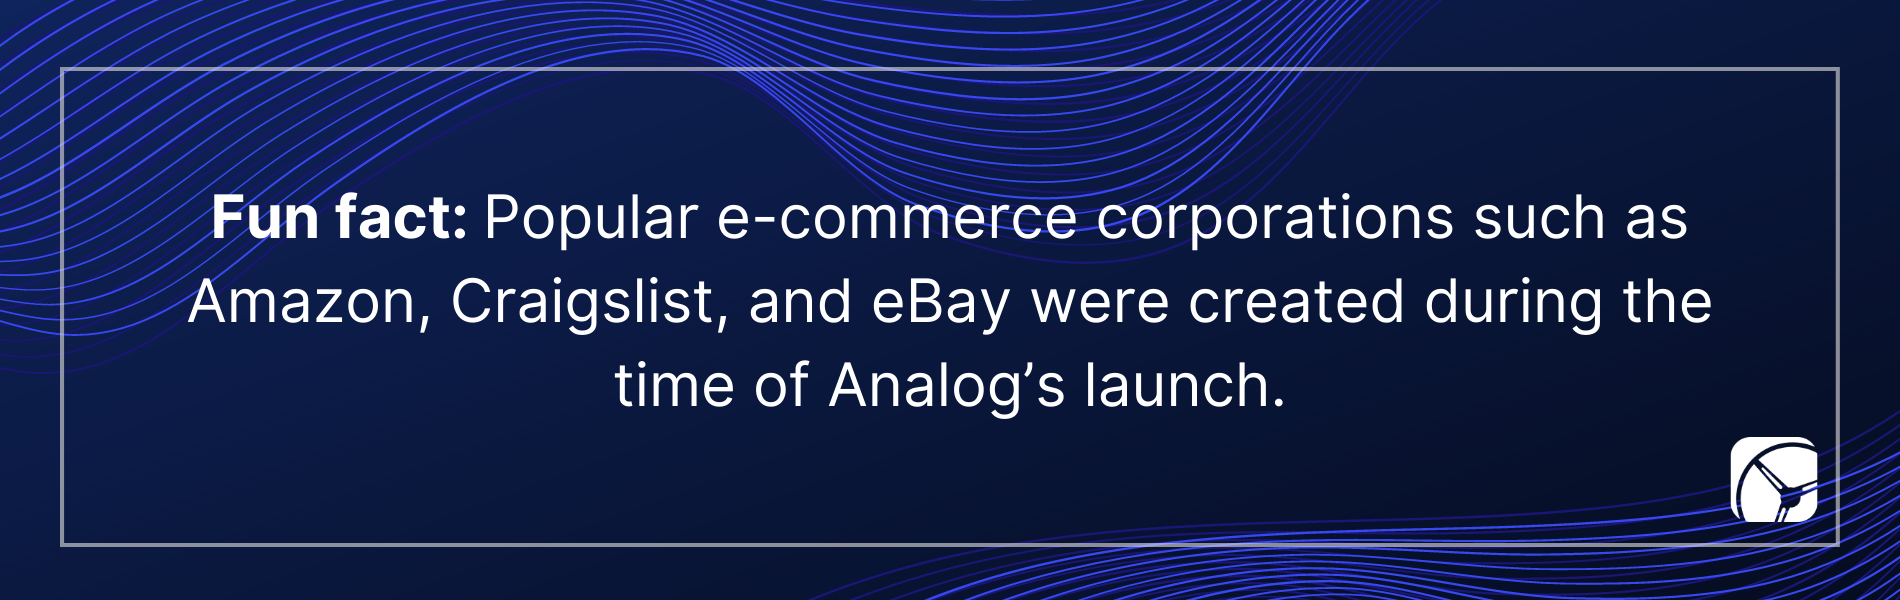 Fun fact: Popular e-commerce corporations such as Amazon, Craigslist, and eBay were created during the time of Analog’s launch.